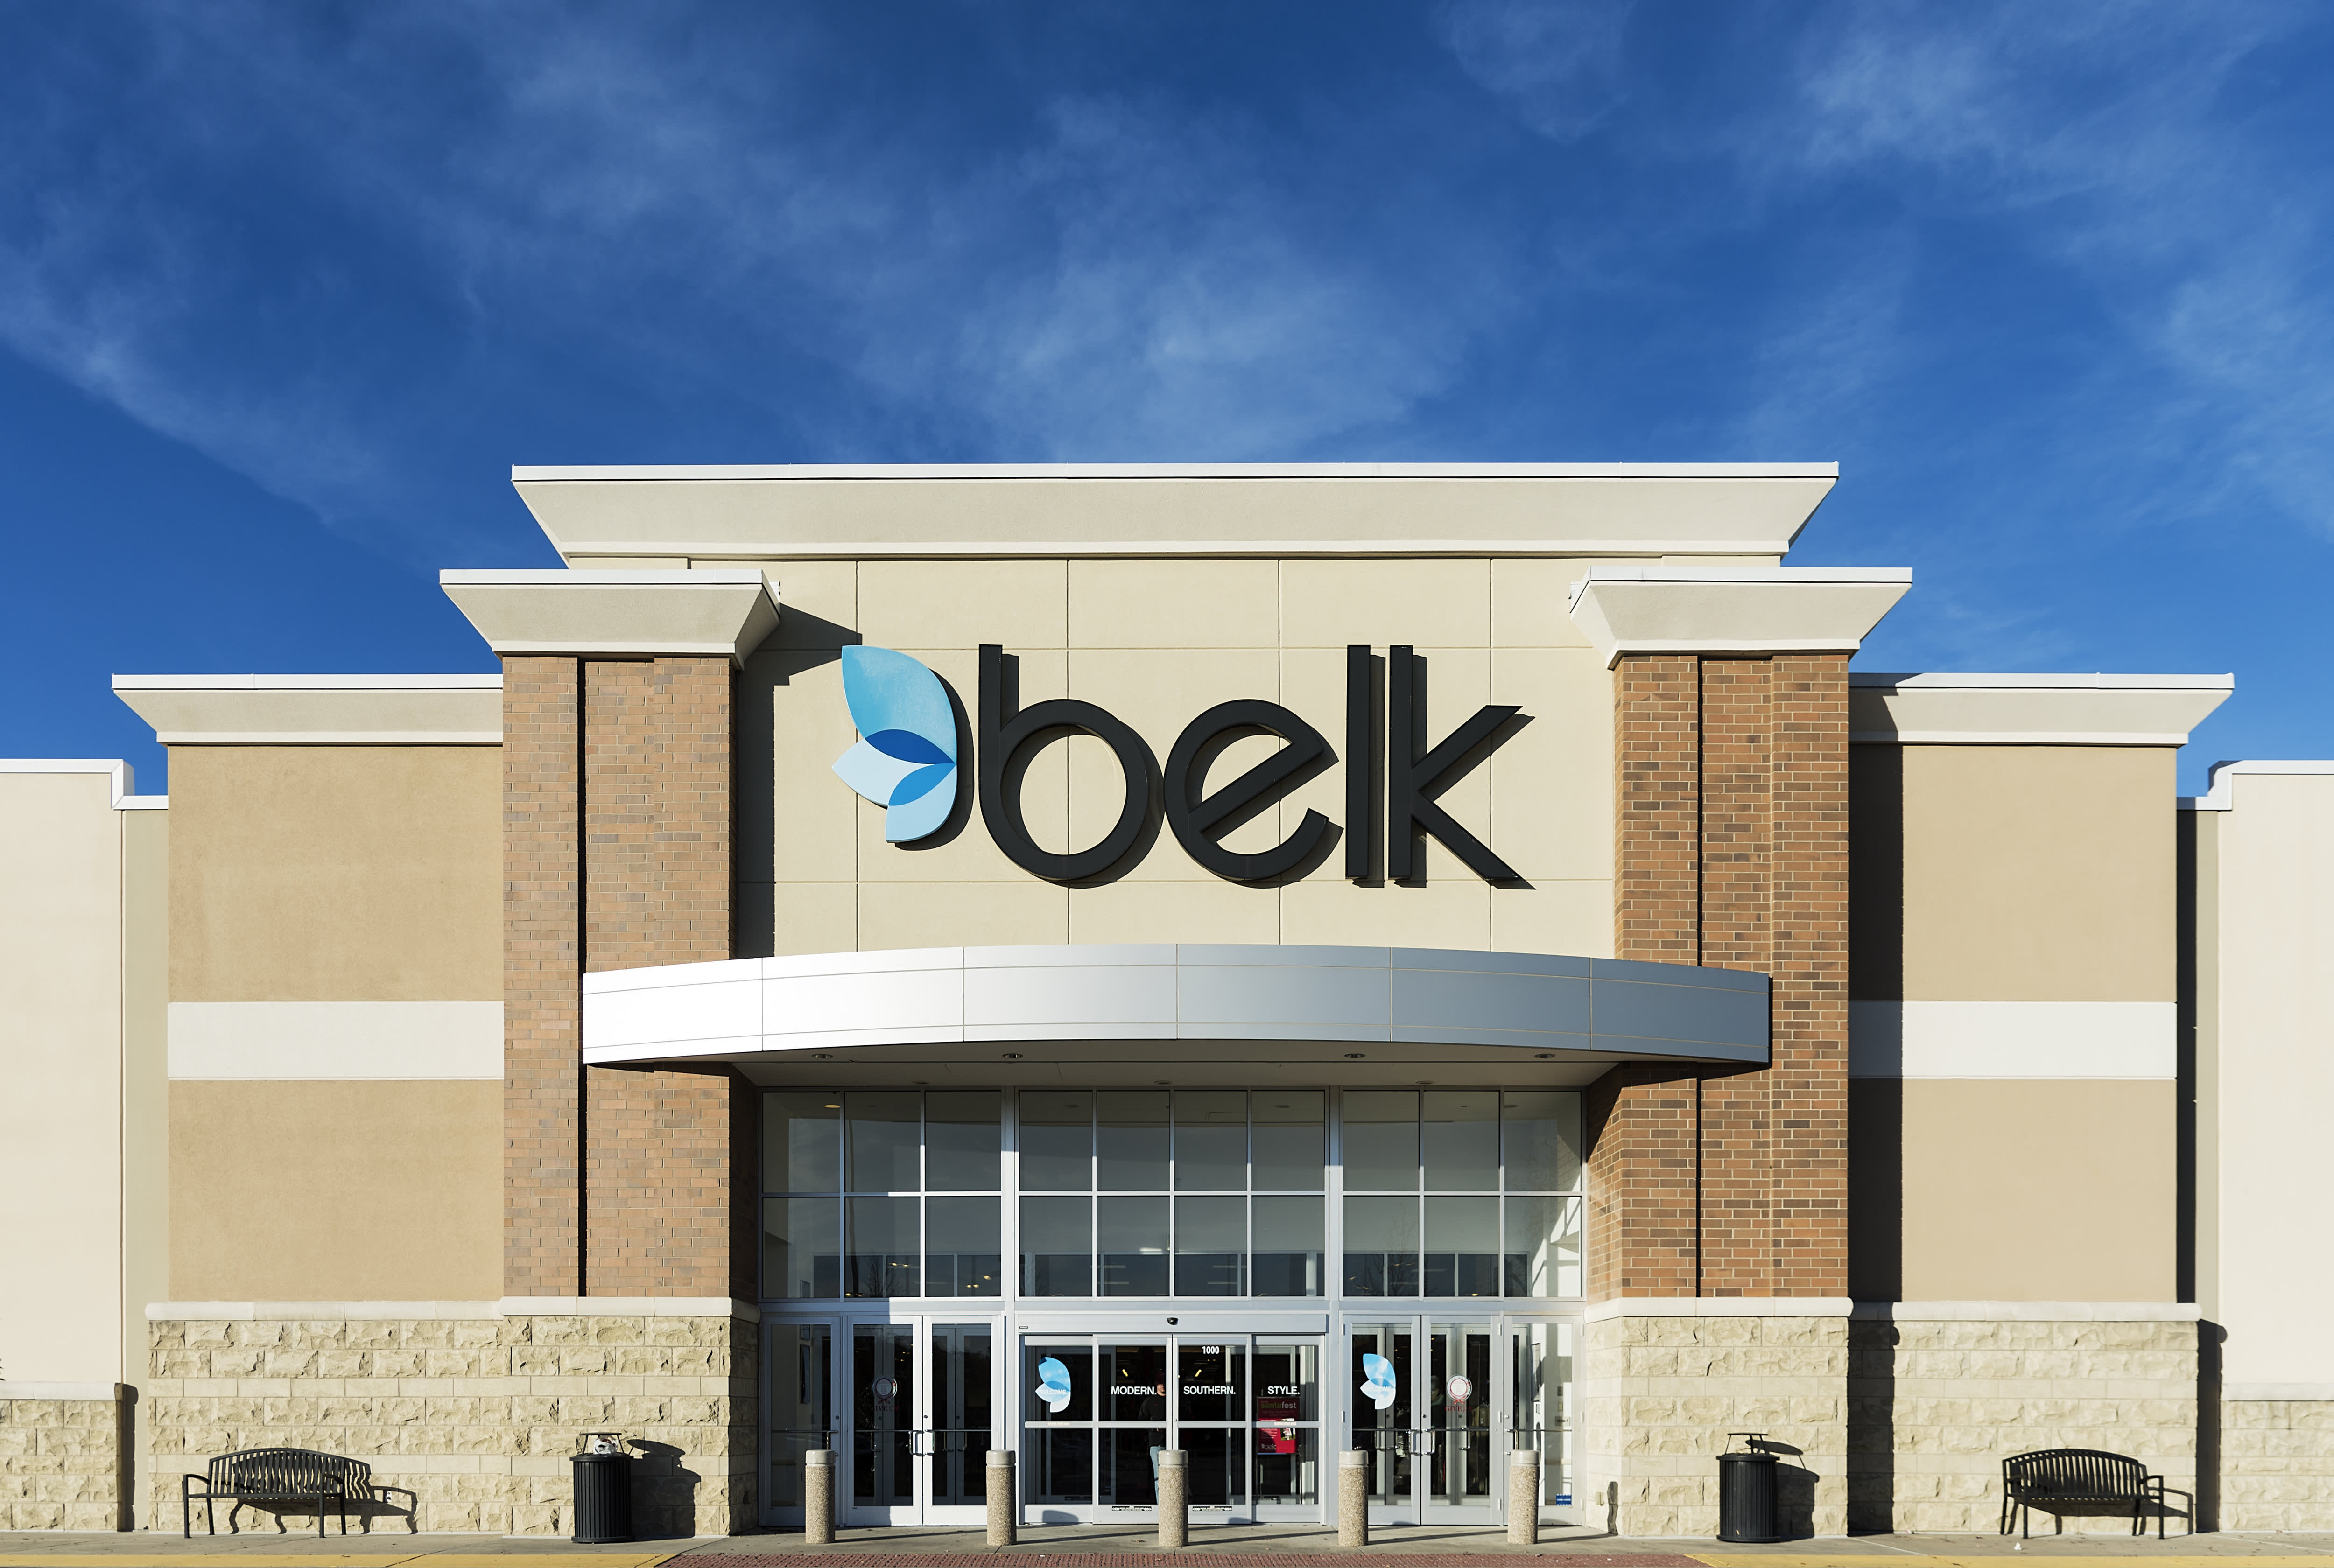 Belk’s Credit Providers Want to Avoid Bankruptcy Retailers: WSJ